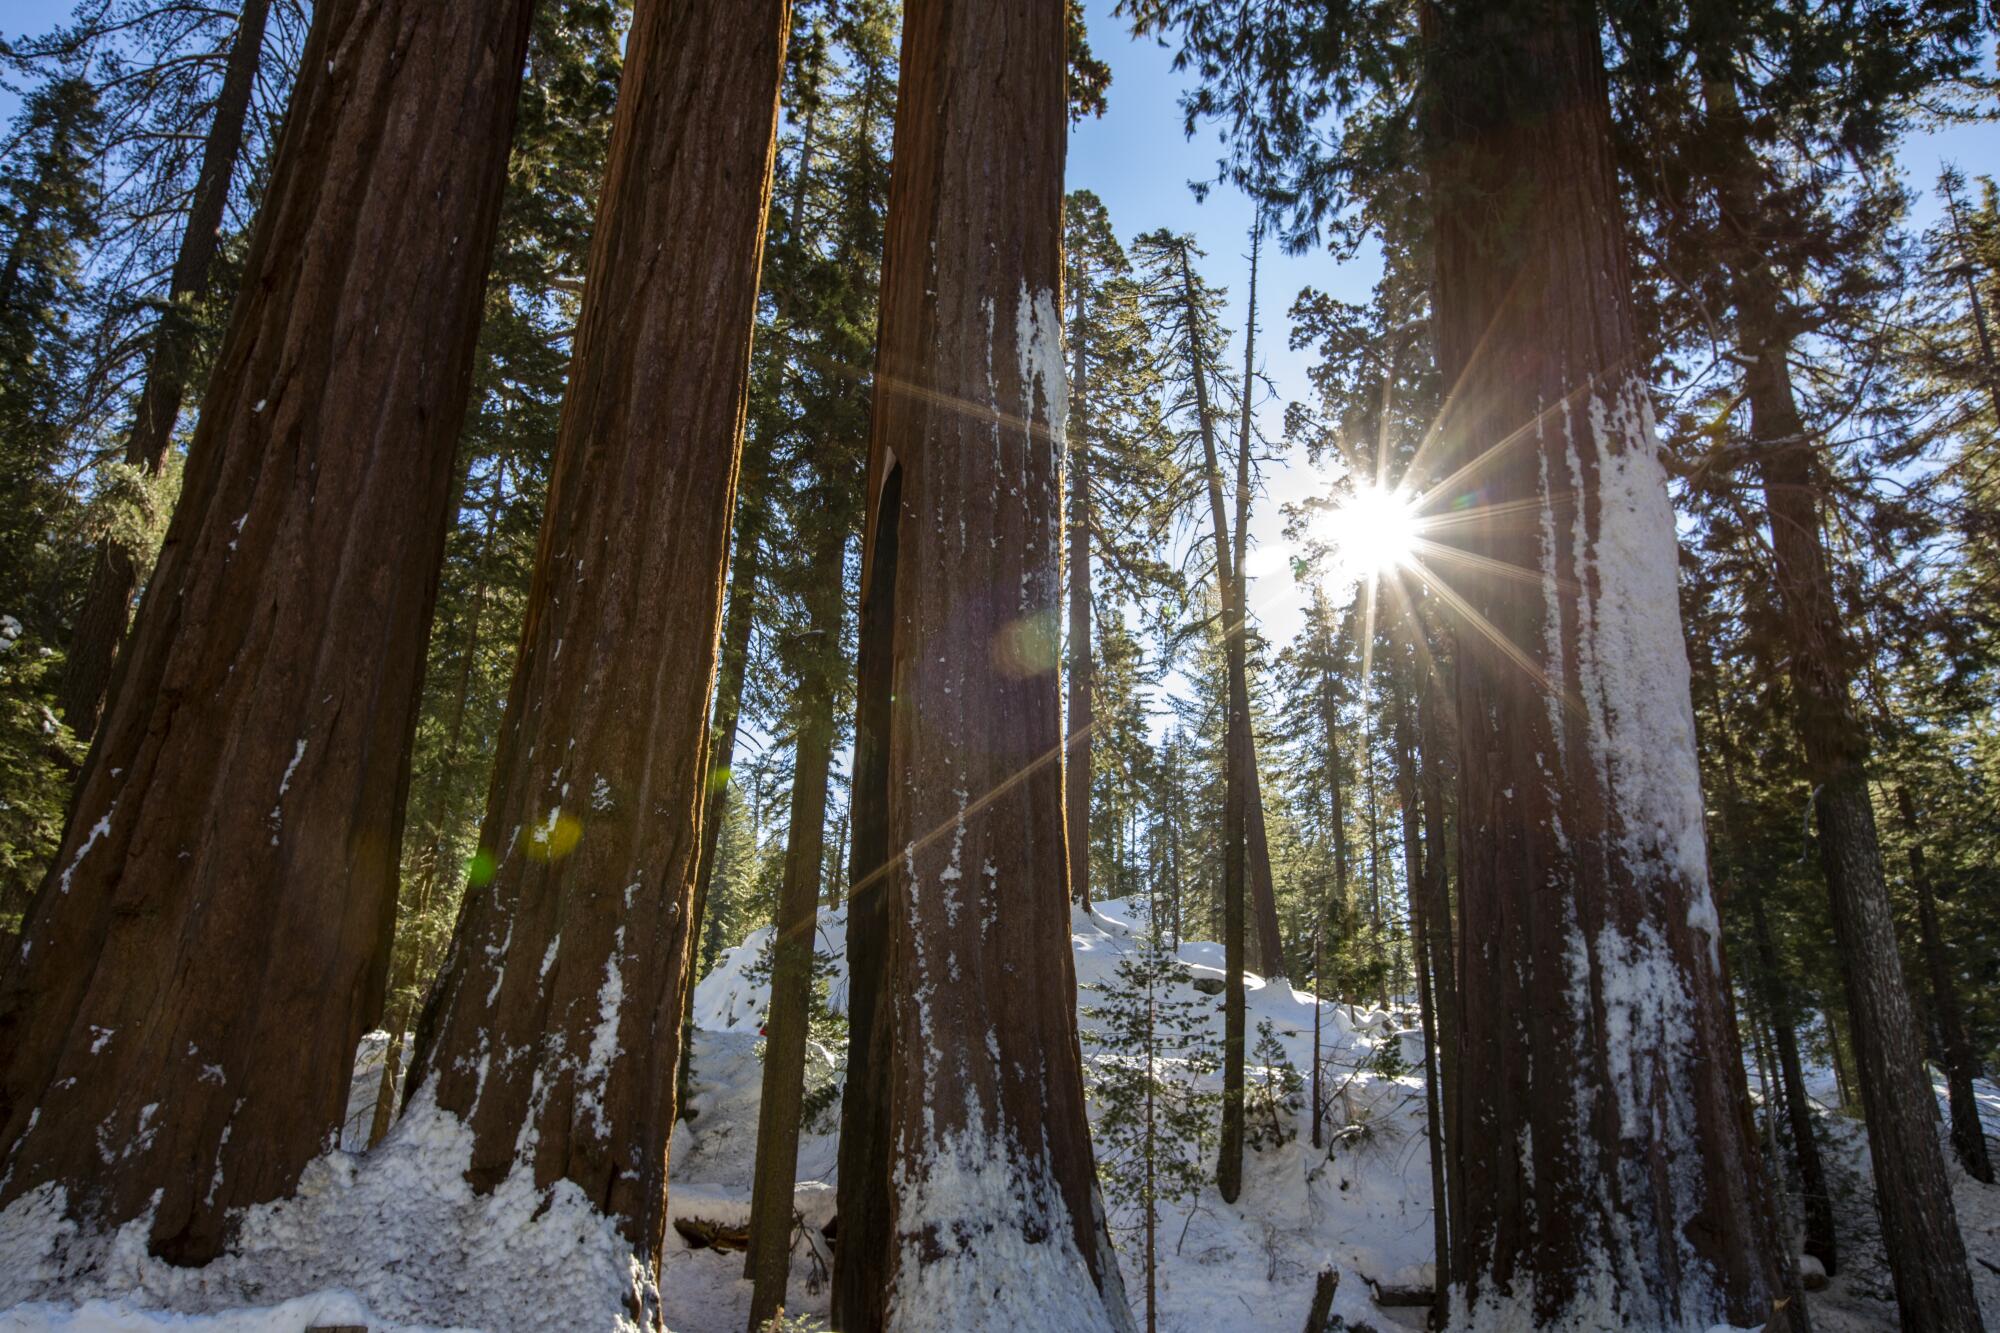 A snowy landscape at Kings Canyon National Park.